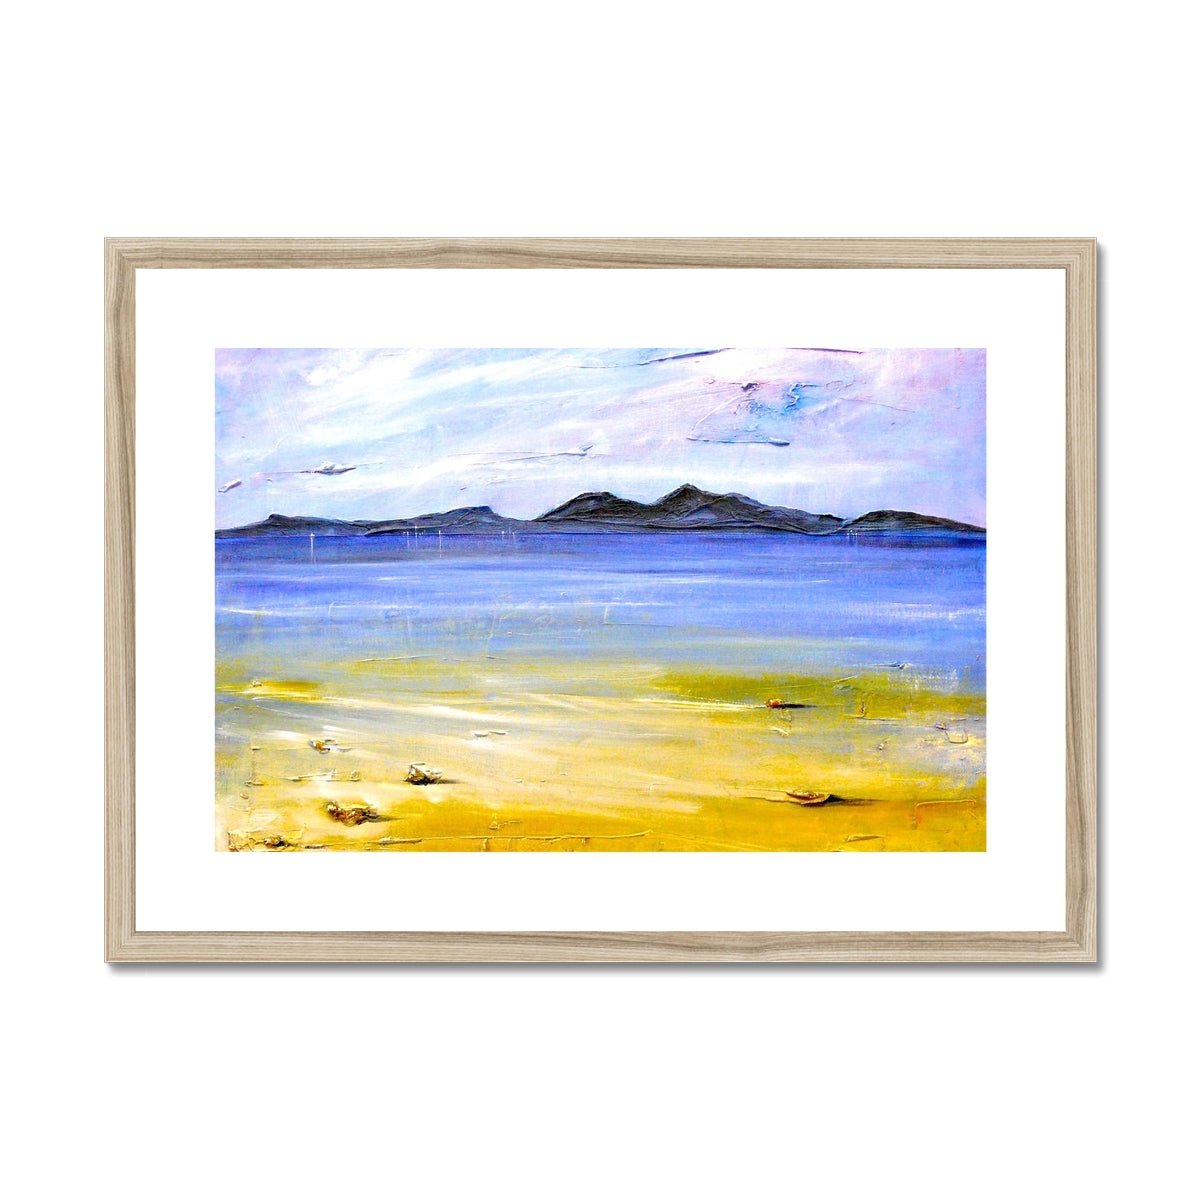 Camusdarach Beach Arisaig Painting | Framed & Mounted Prints From Scotland-Framed & Mounted Prints-Scottish Highlands & Lowlands Art Gallery-A2 Landscape-Natural Frame-Paintings, Prints, Homeware, Art Gifts From Scotland By Scottish Artist Kevin Hunter